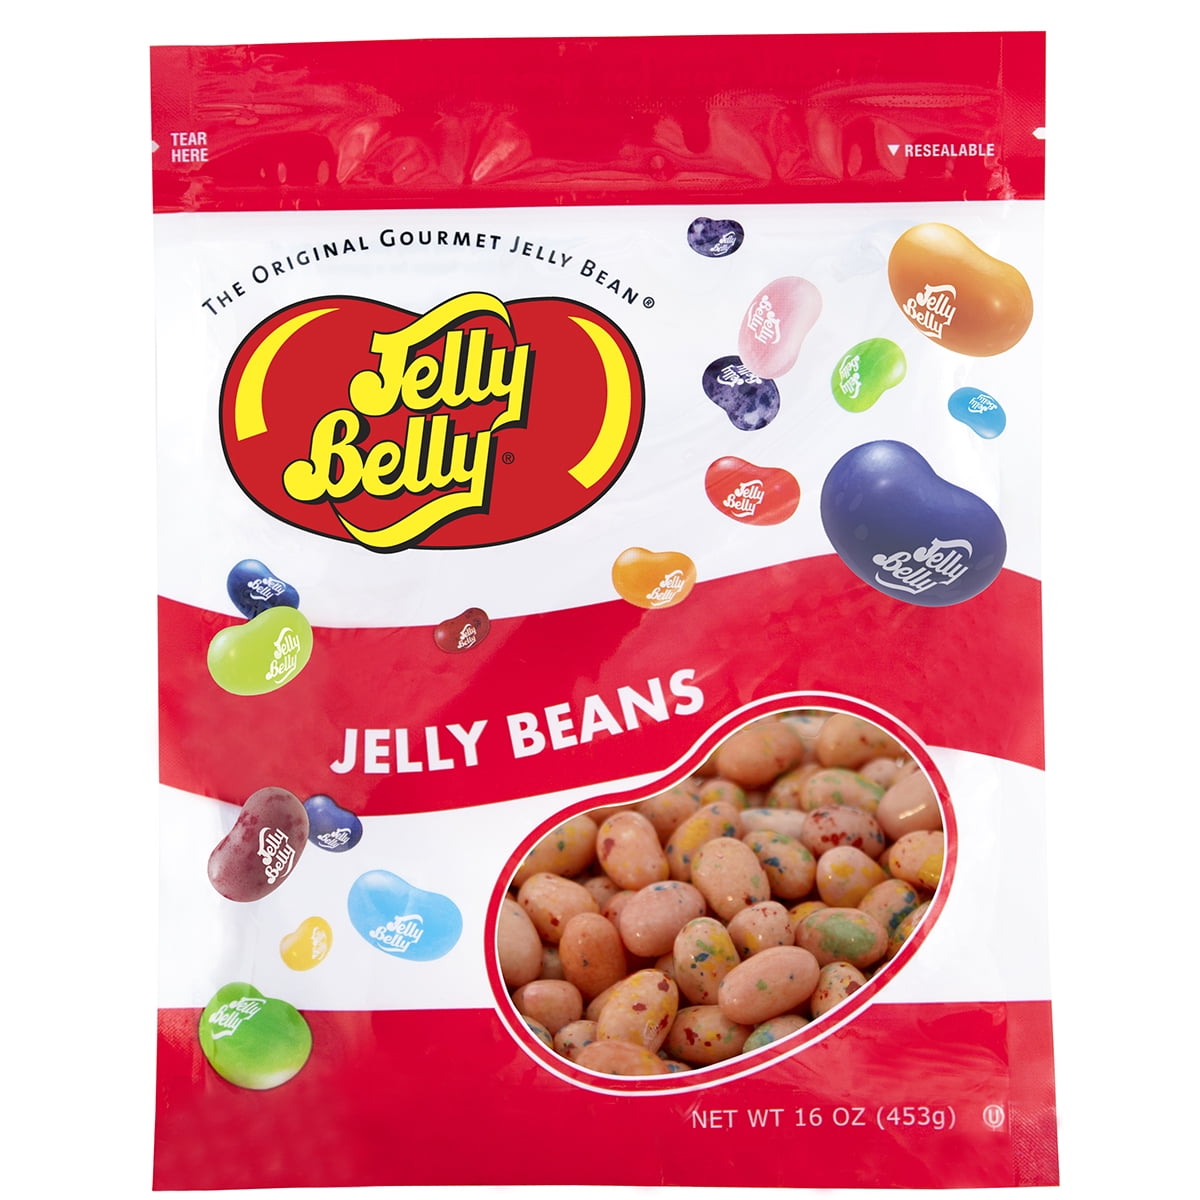 Sugar-Free Jelly Belly Jelly Beans S 12 x 2.8 Ounce Bags Official Genuine 